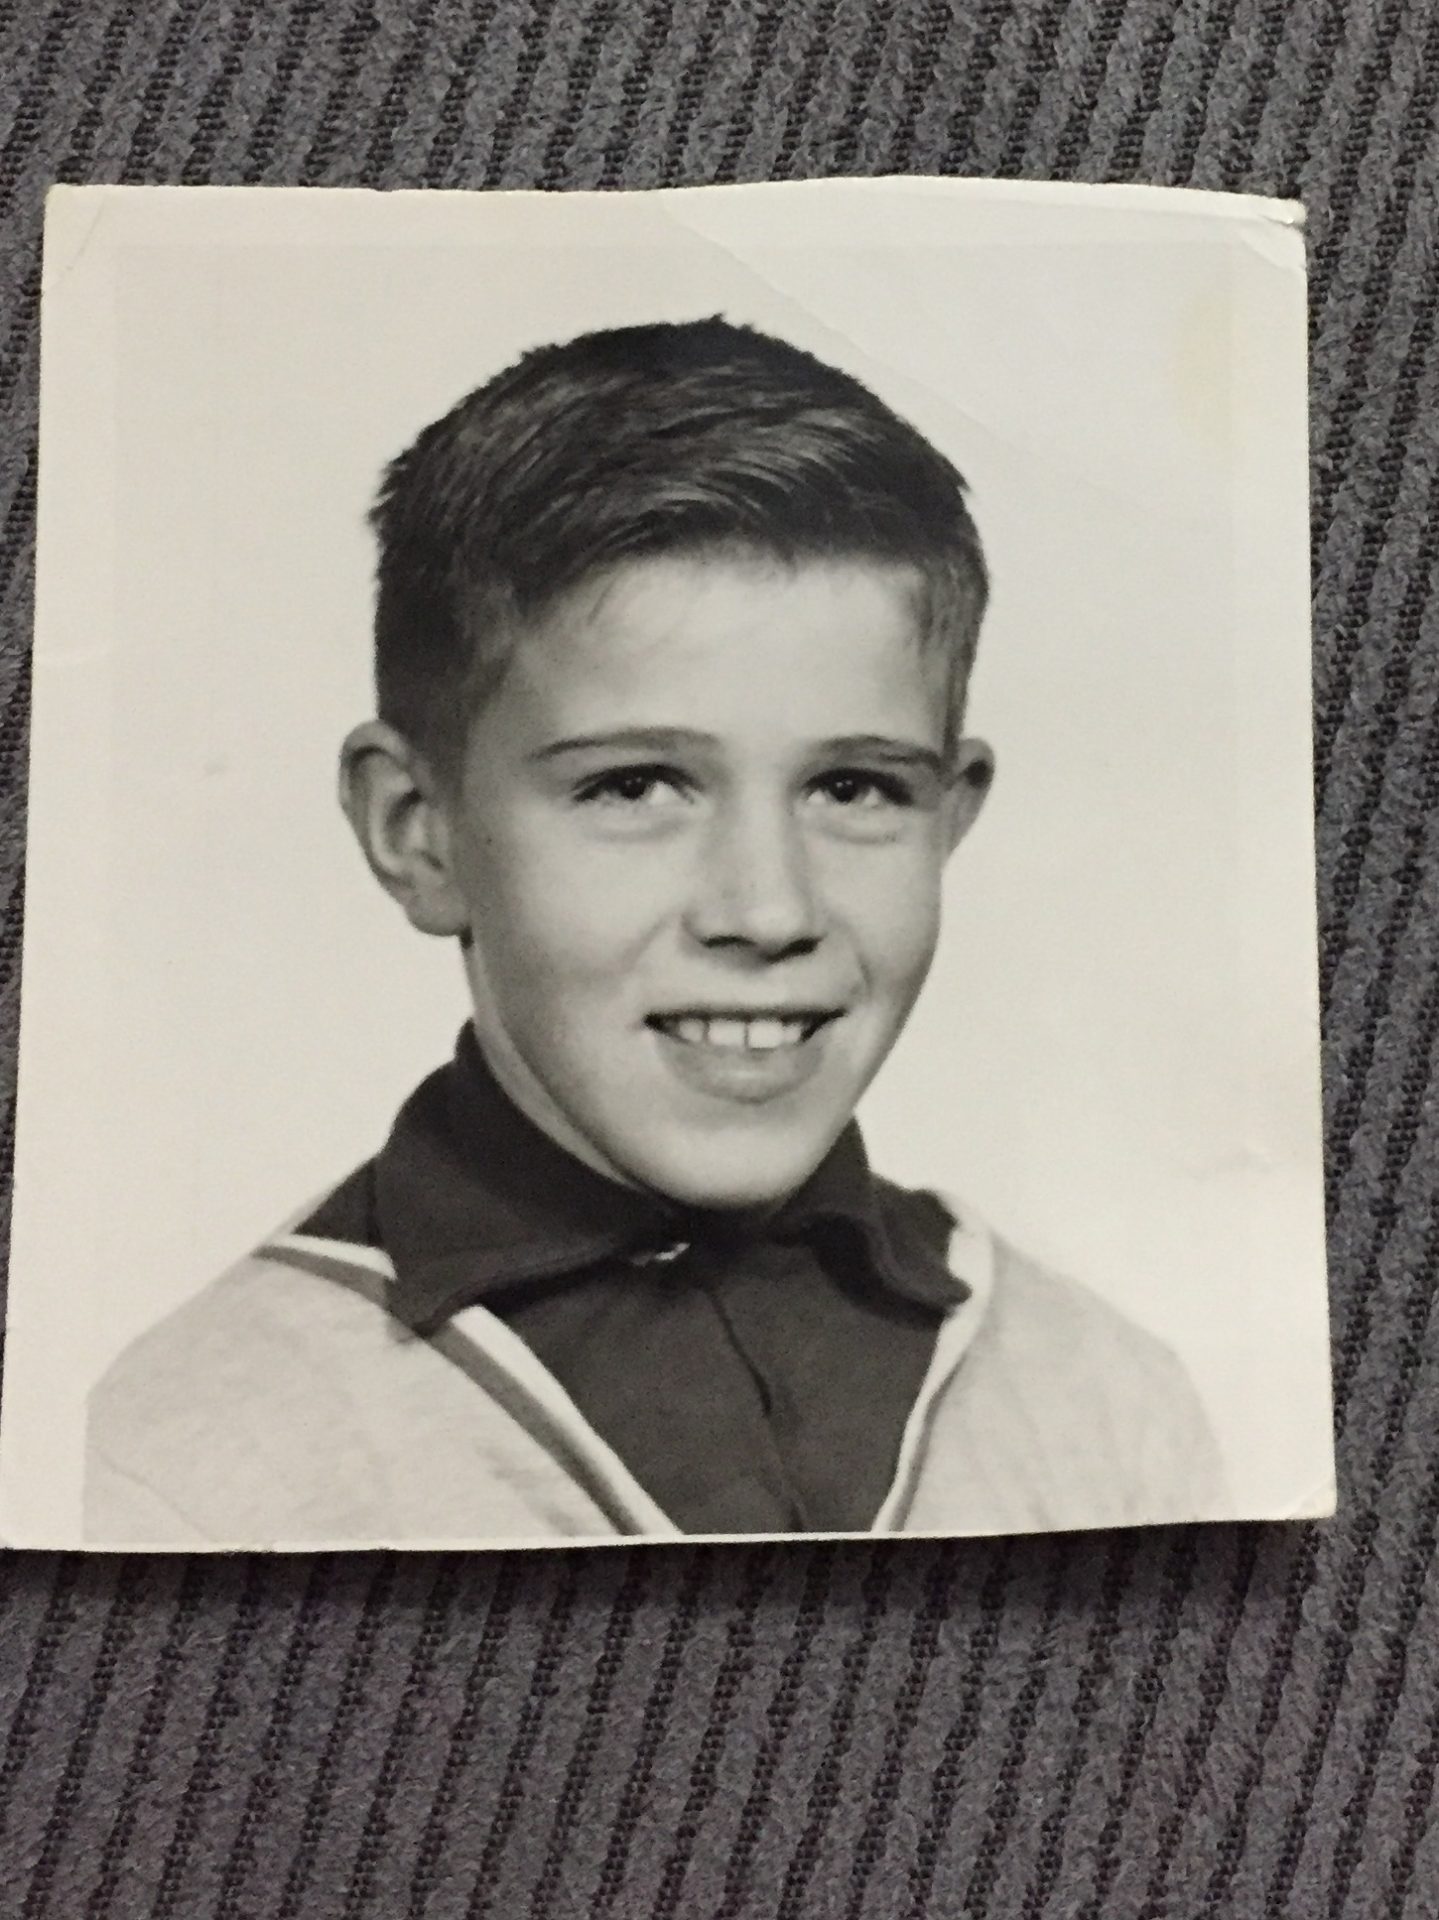 Found this school picture. Not sure of the date or how old he is.